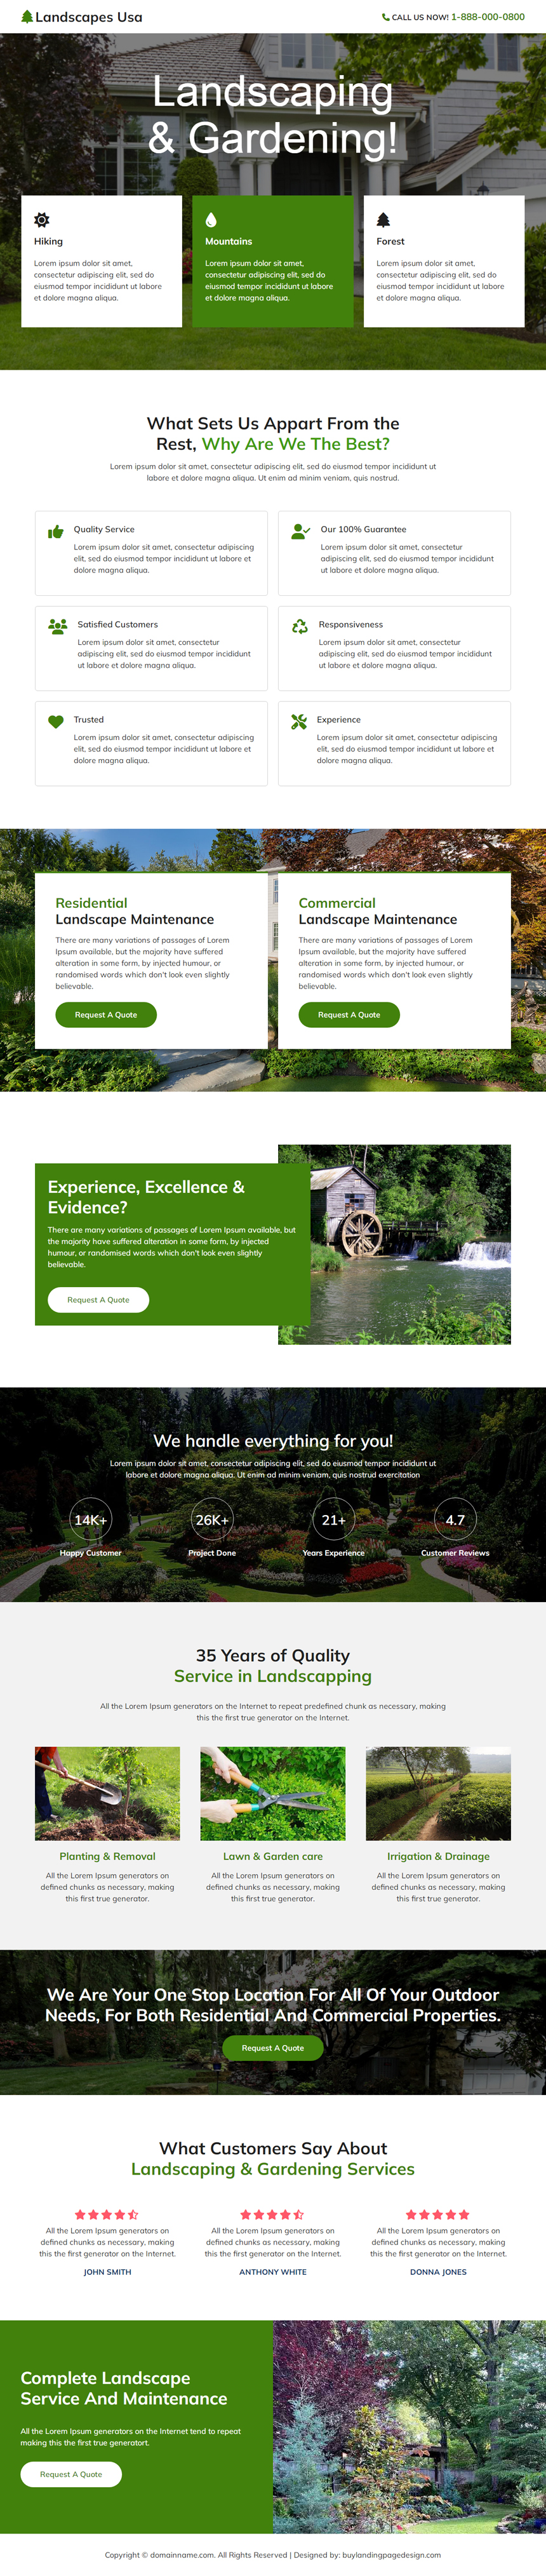 landscaping and gardening lead capture responsive landing page